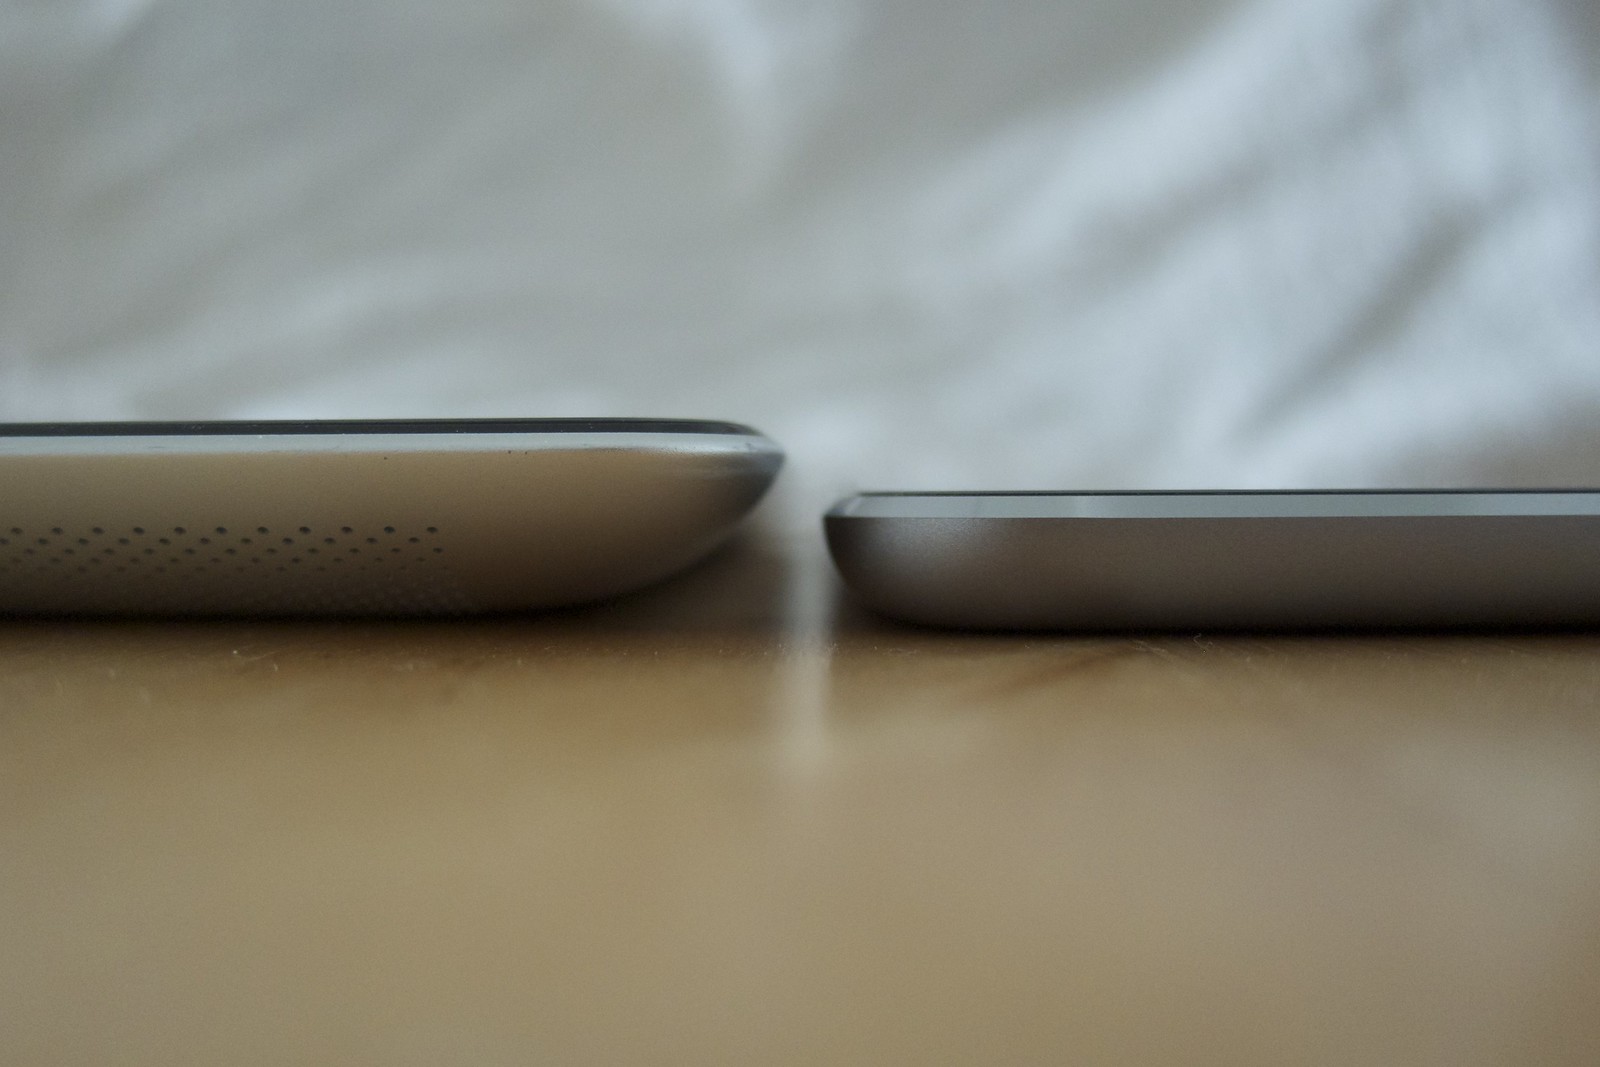 Thickness of iPad Air 2 and iPad(3rd Gen).